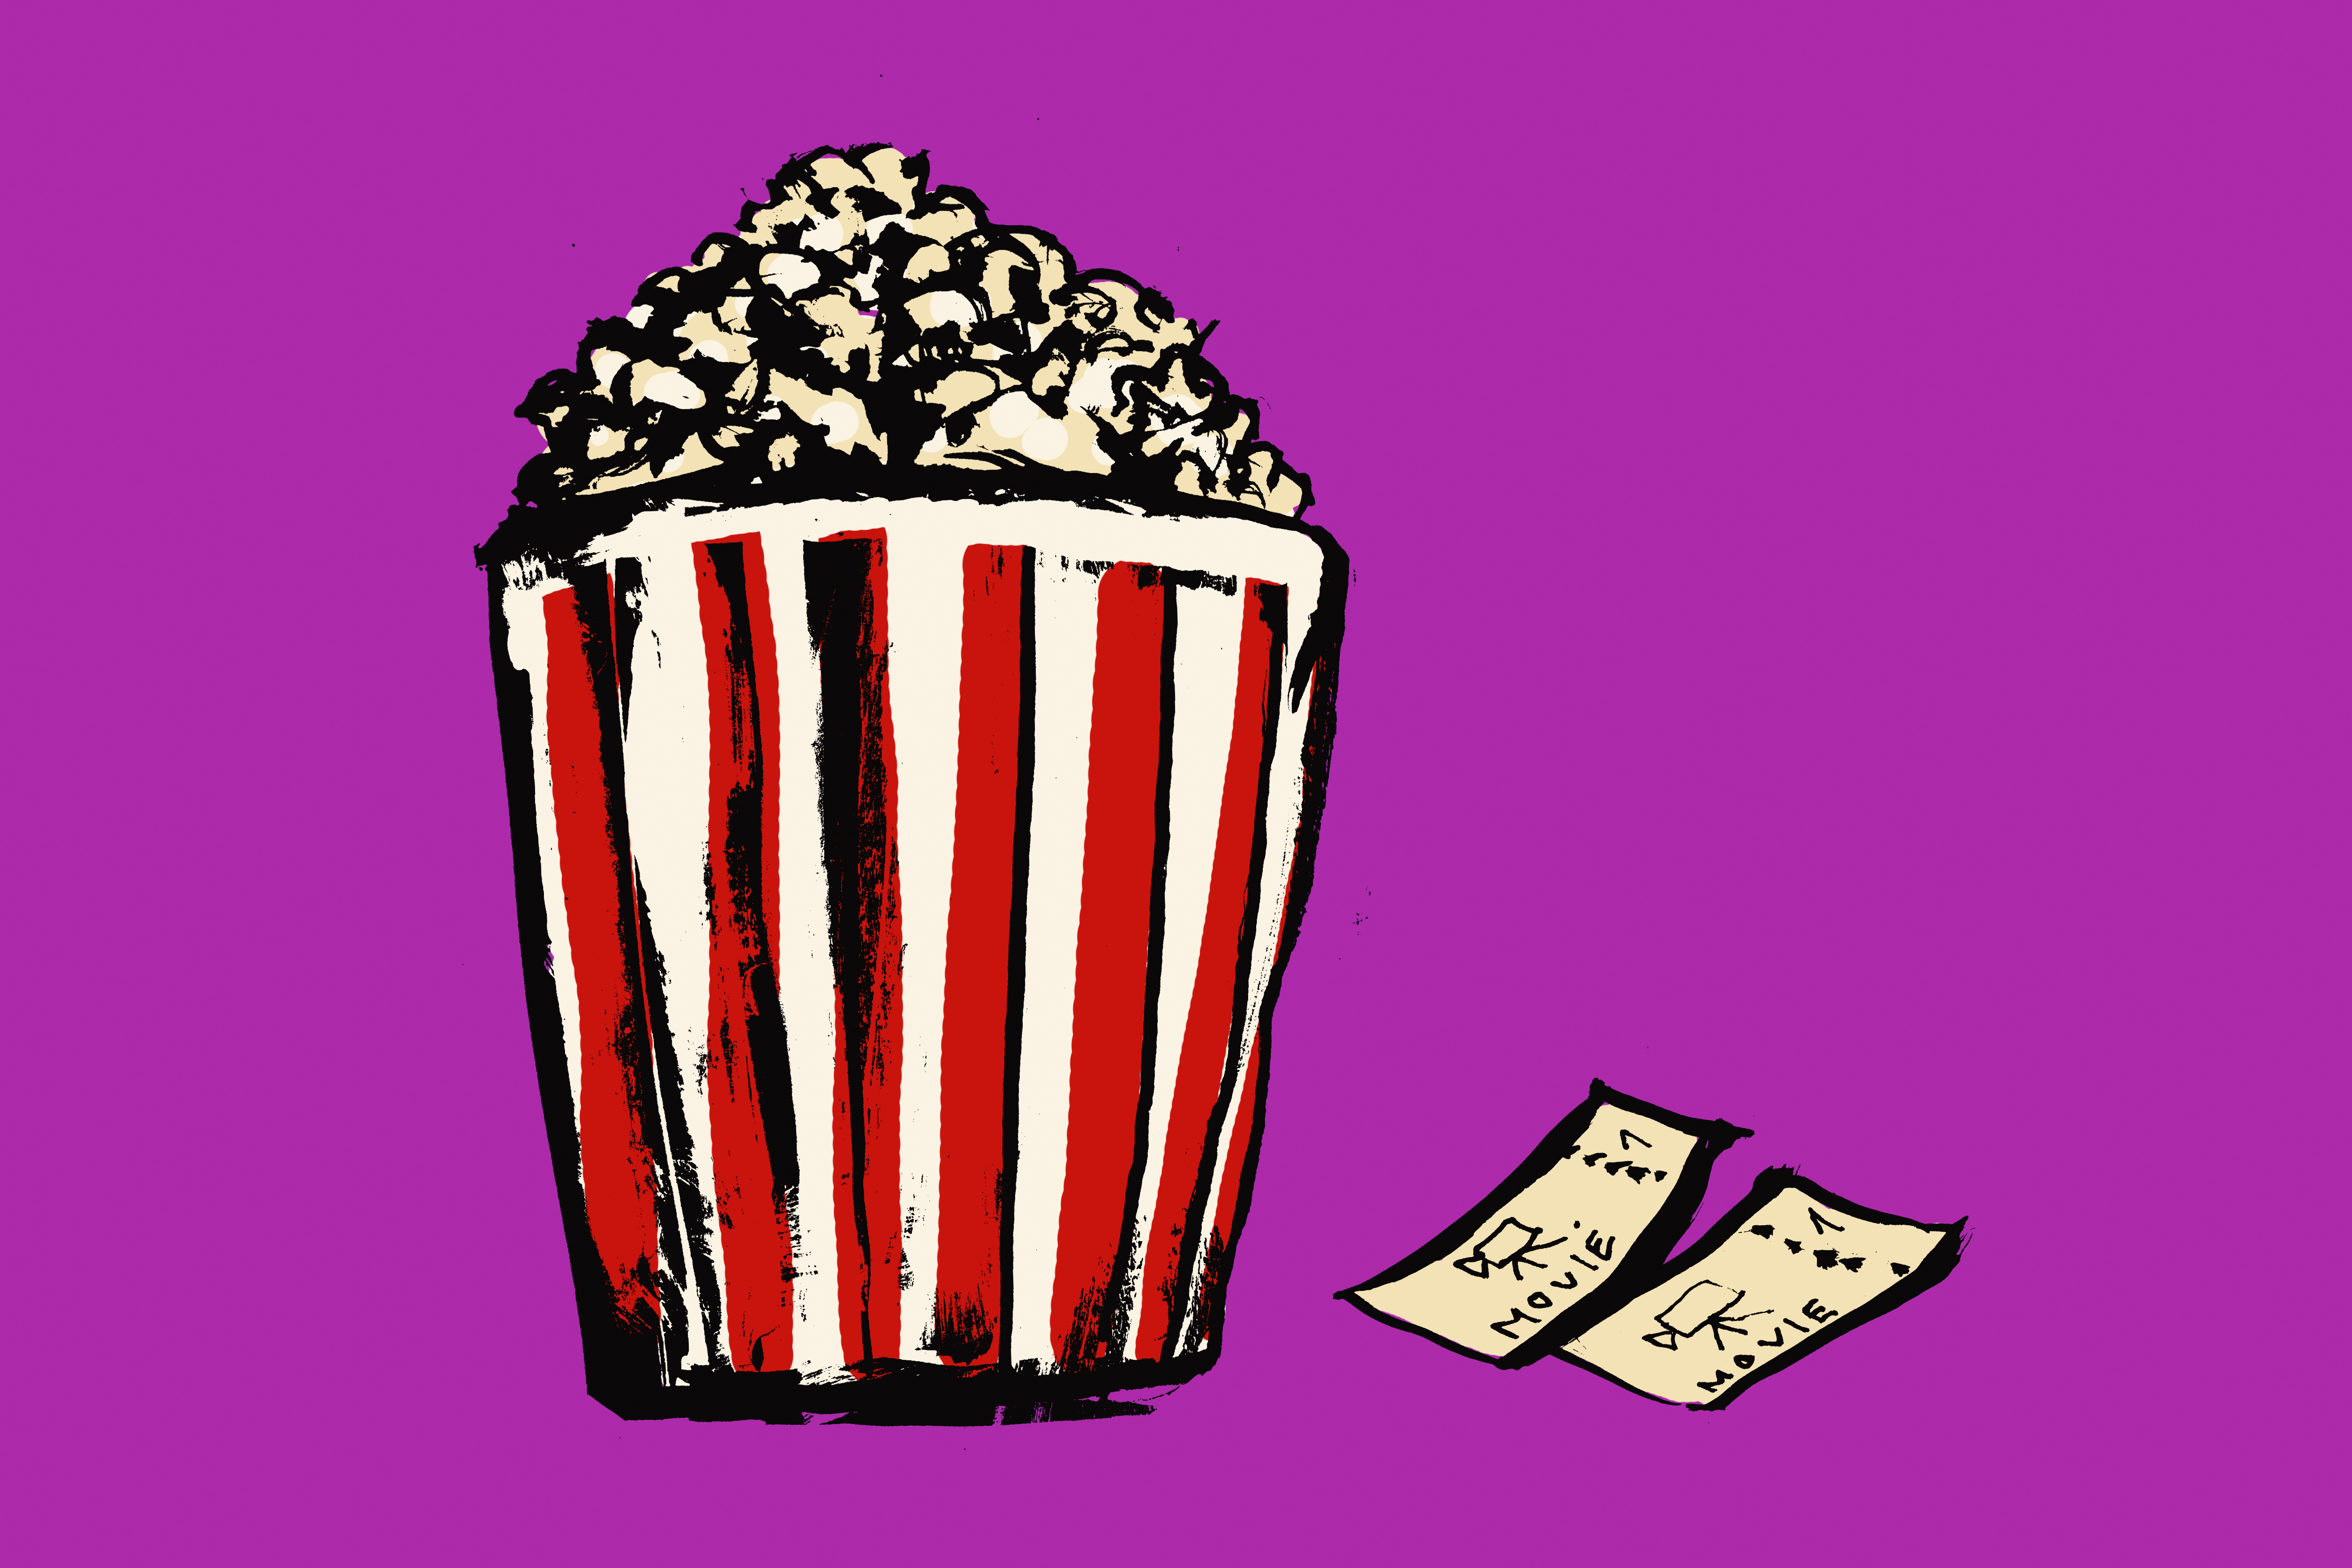 Illustration of popcorn box and movie tickets against pink background